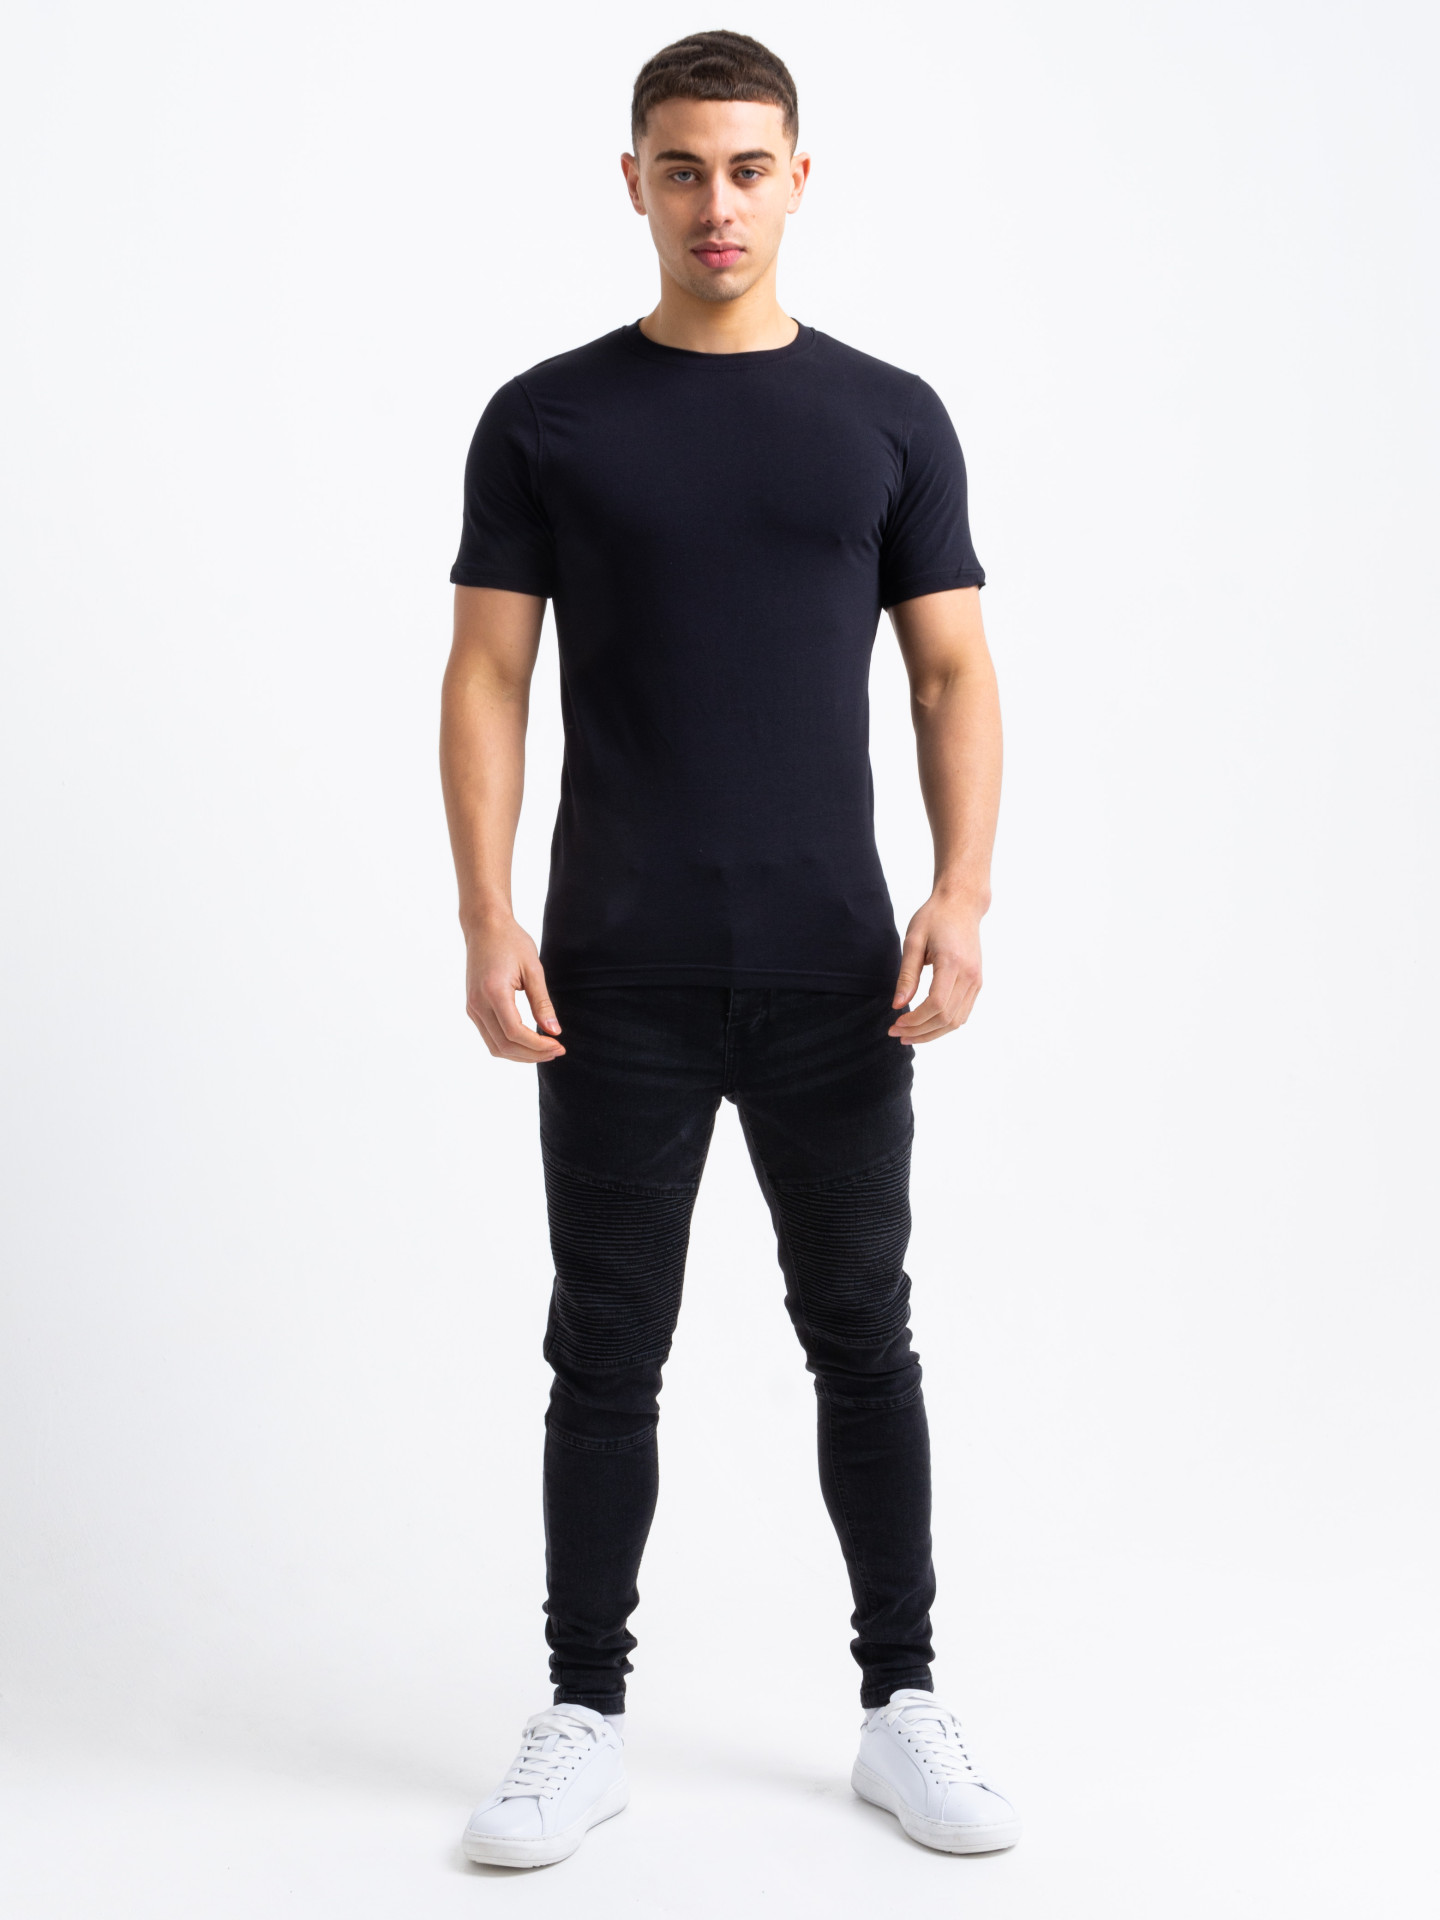 Premium Muscle Fit T-Shirt in Black | Men's Clothing & Fashion | HisColumn